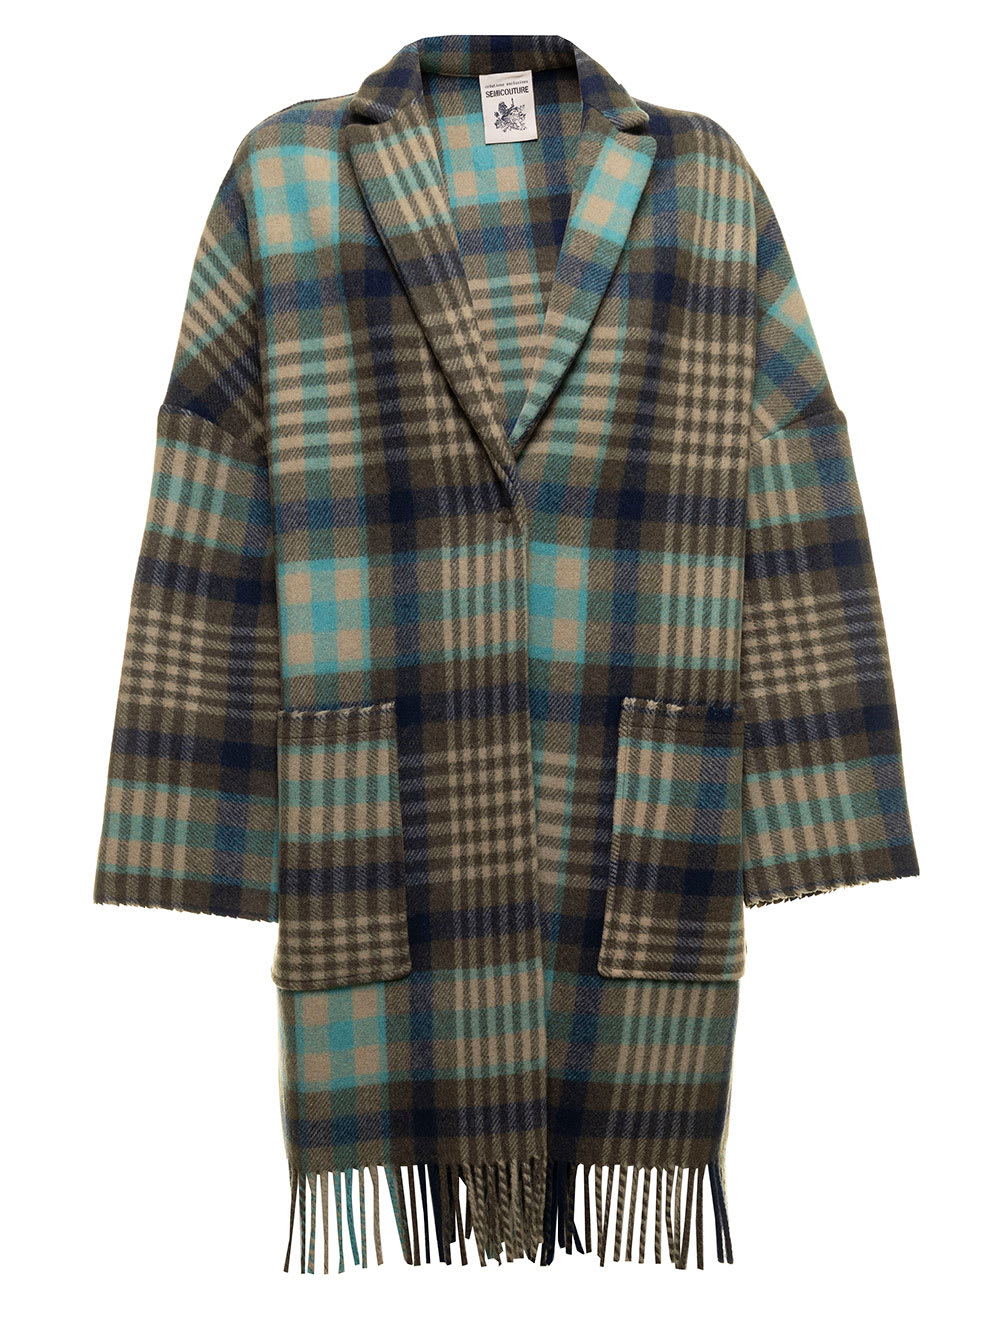 SEMICOUTURE SEMICOUTURE WOMANS MULTIcolour WOOL CHECK COAT WITH FRINGES